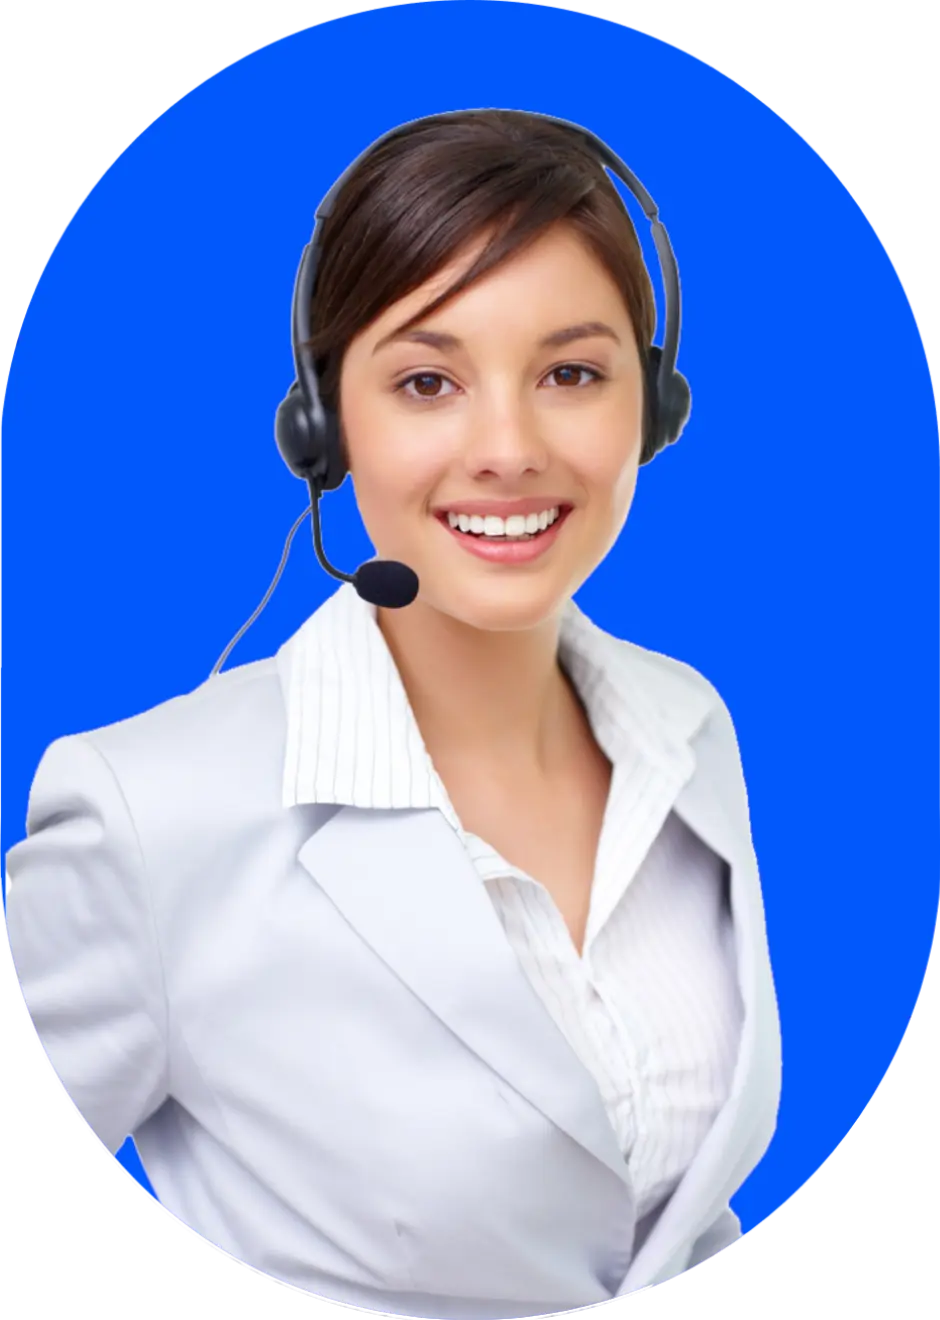 call center woman smiling blue background